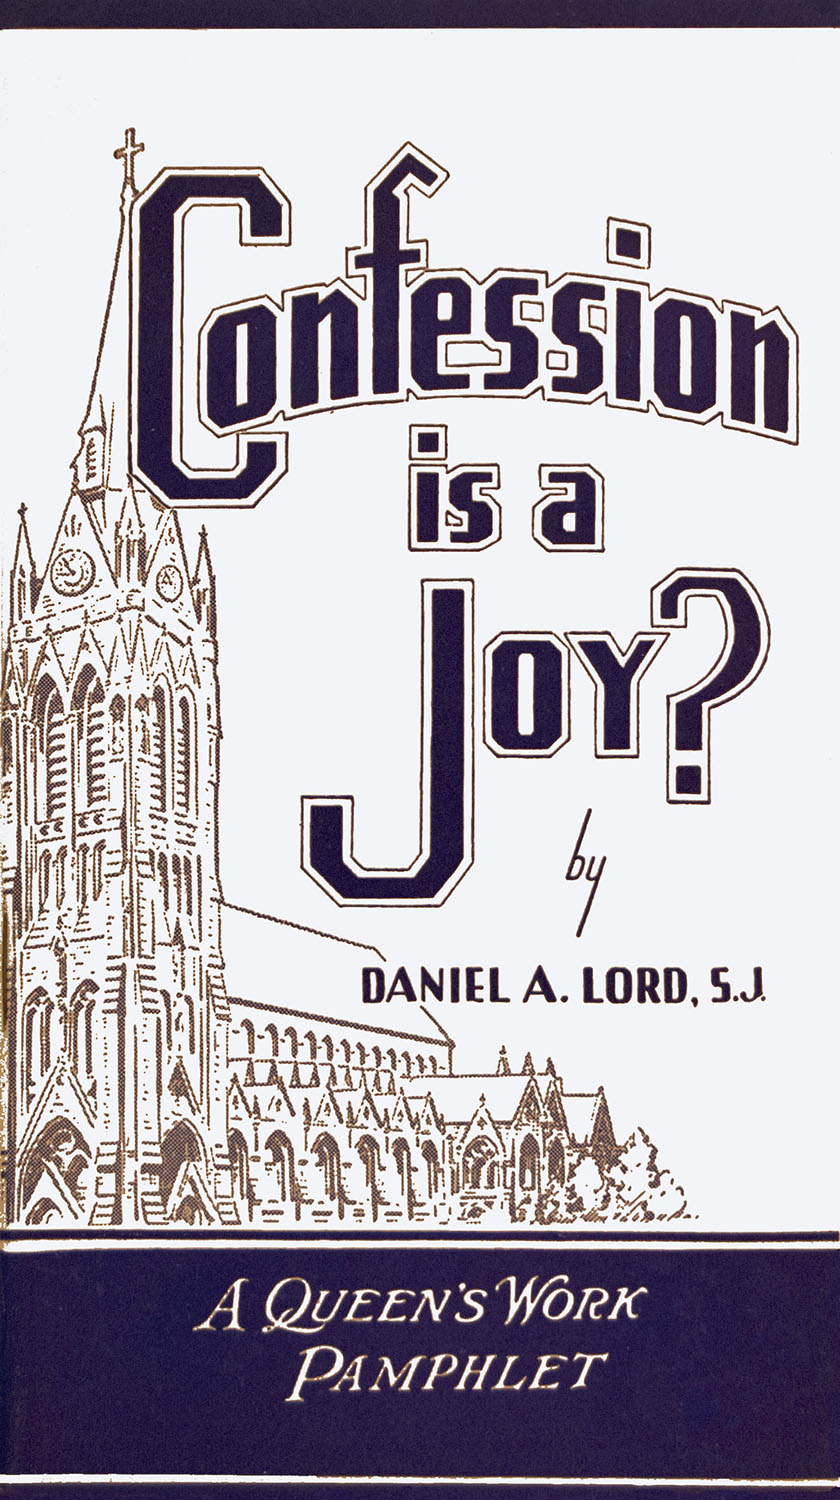 Lord Pamphlet: Confession is a Joy